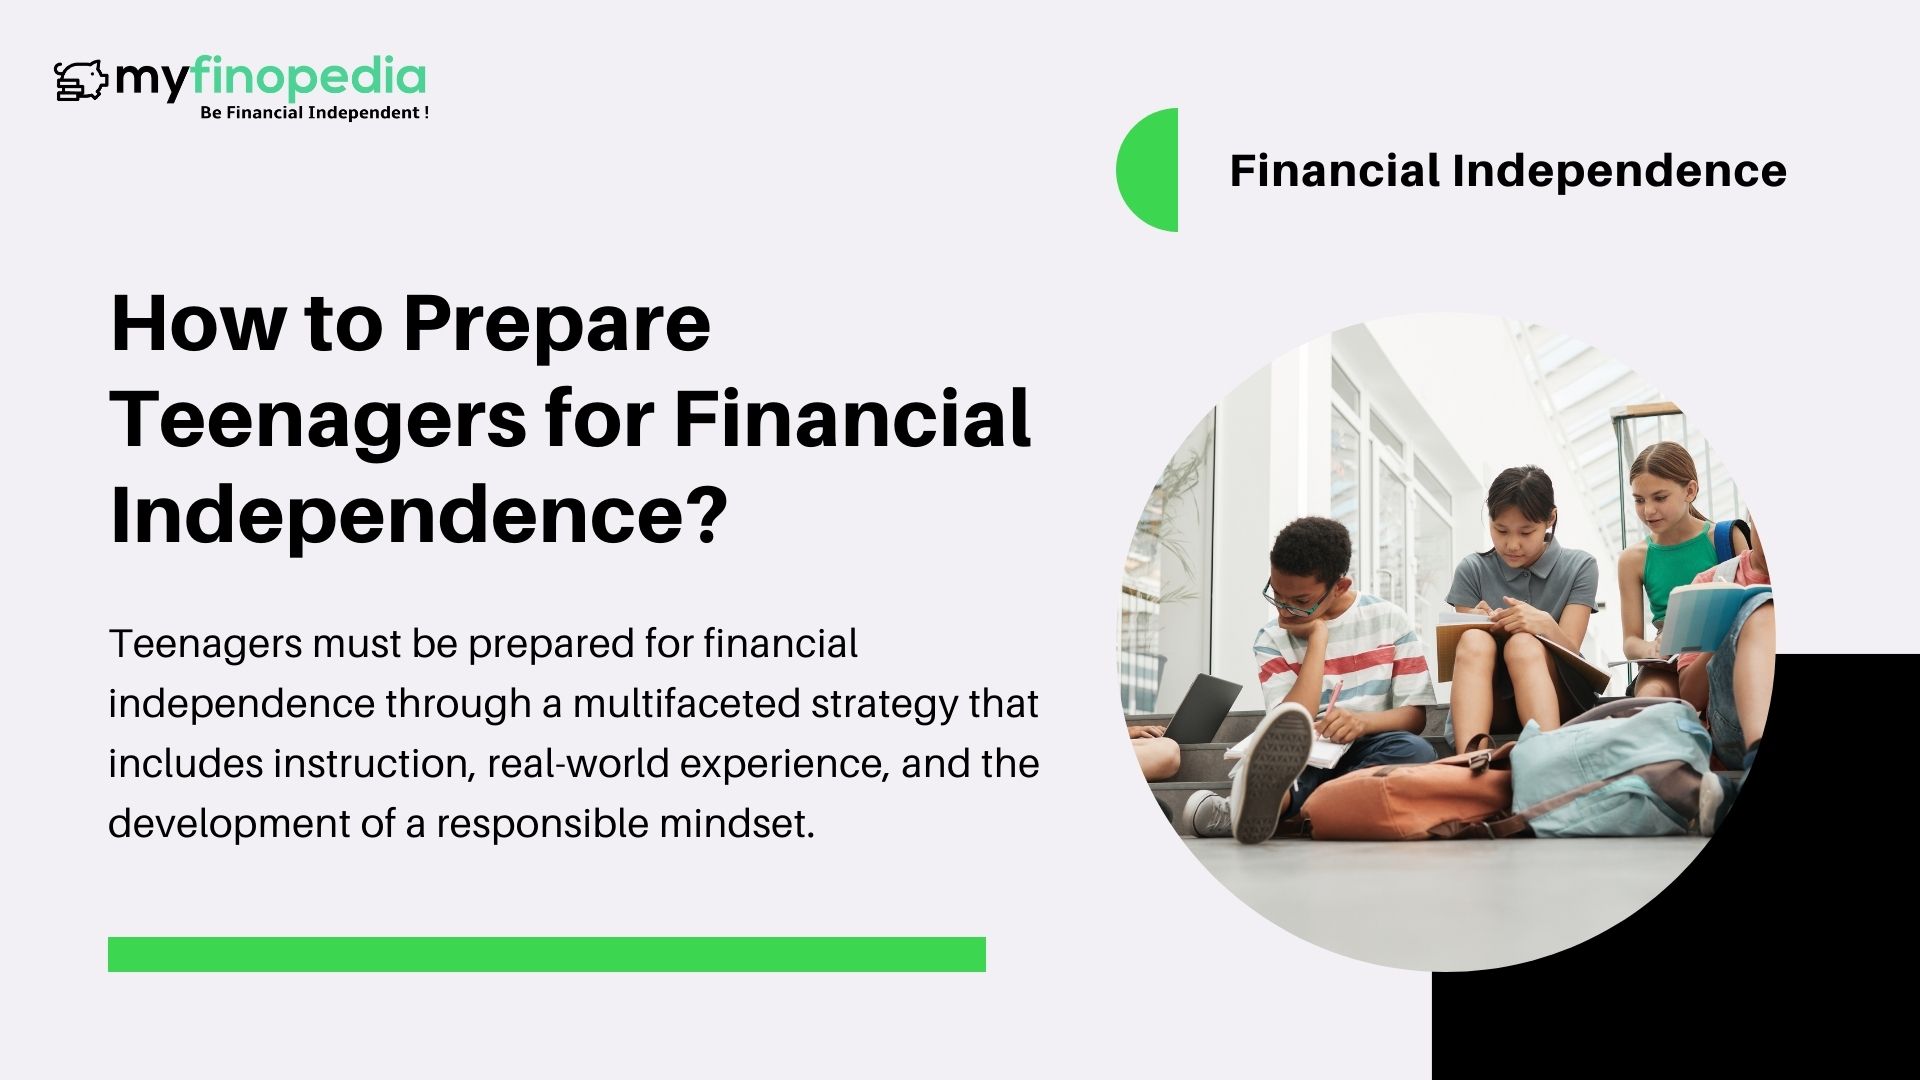 How to Prepare Teenagers for Financial Independence